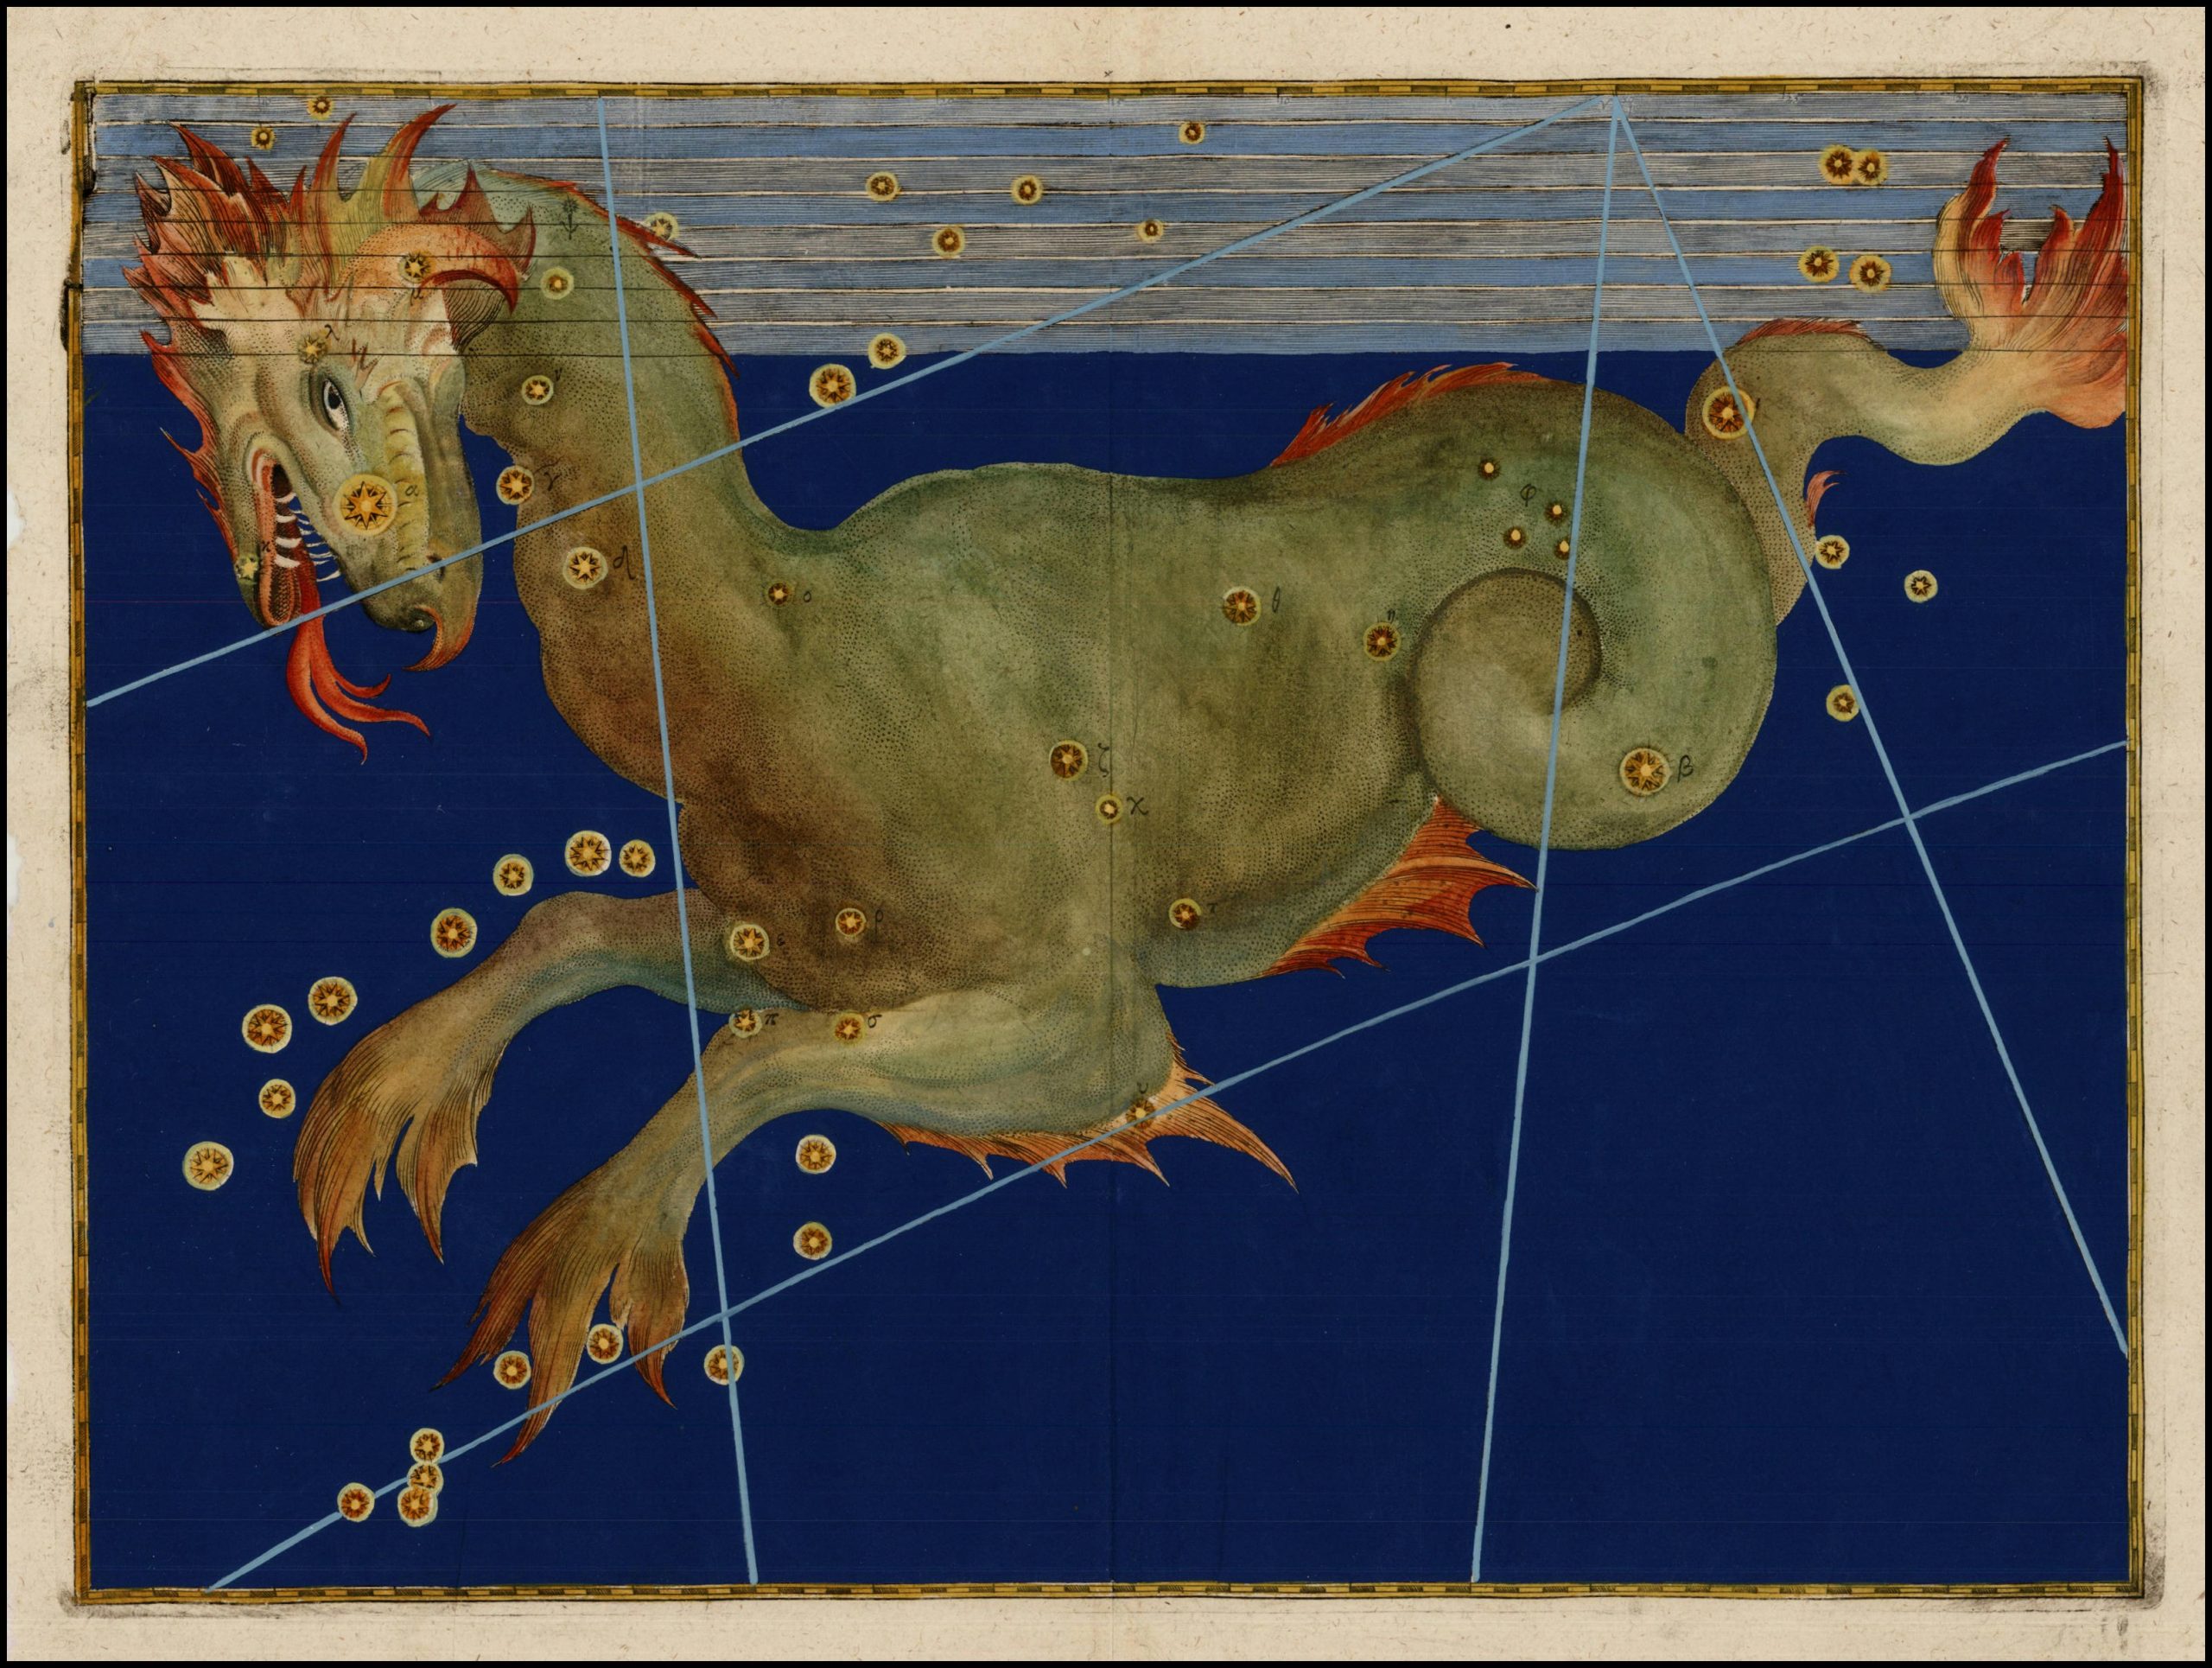 A large sea monster covers the page of a blue background with a few diagonal lines crossing through the image.